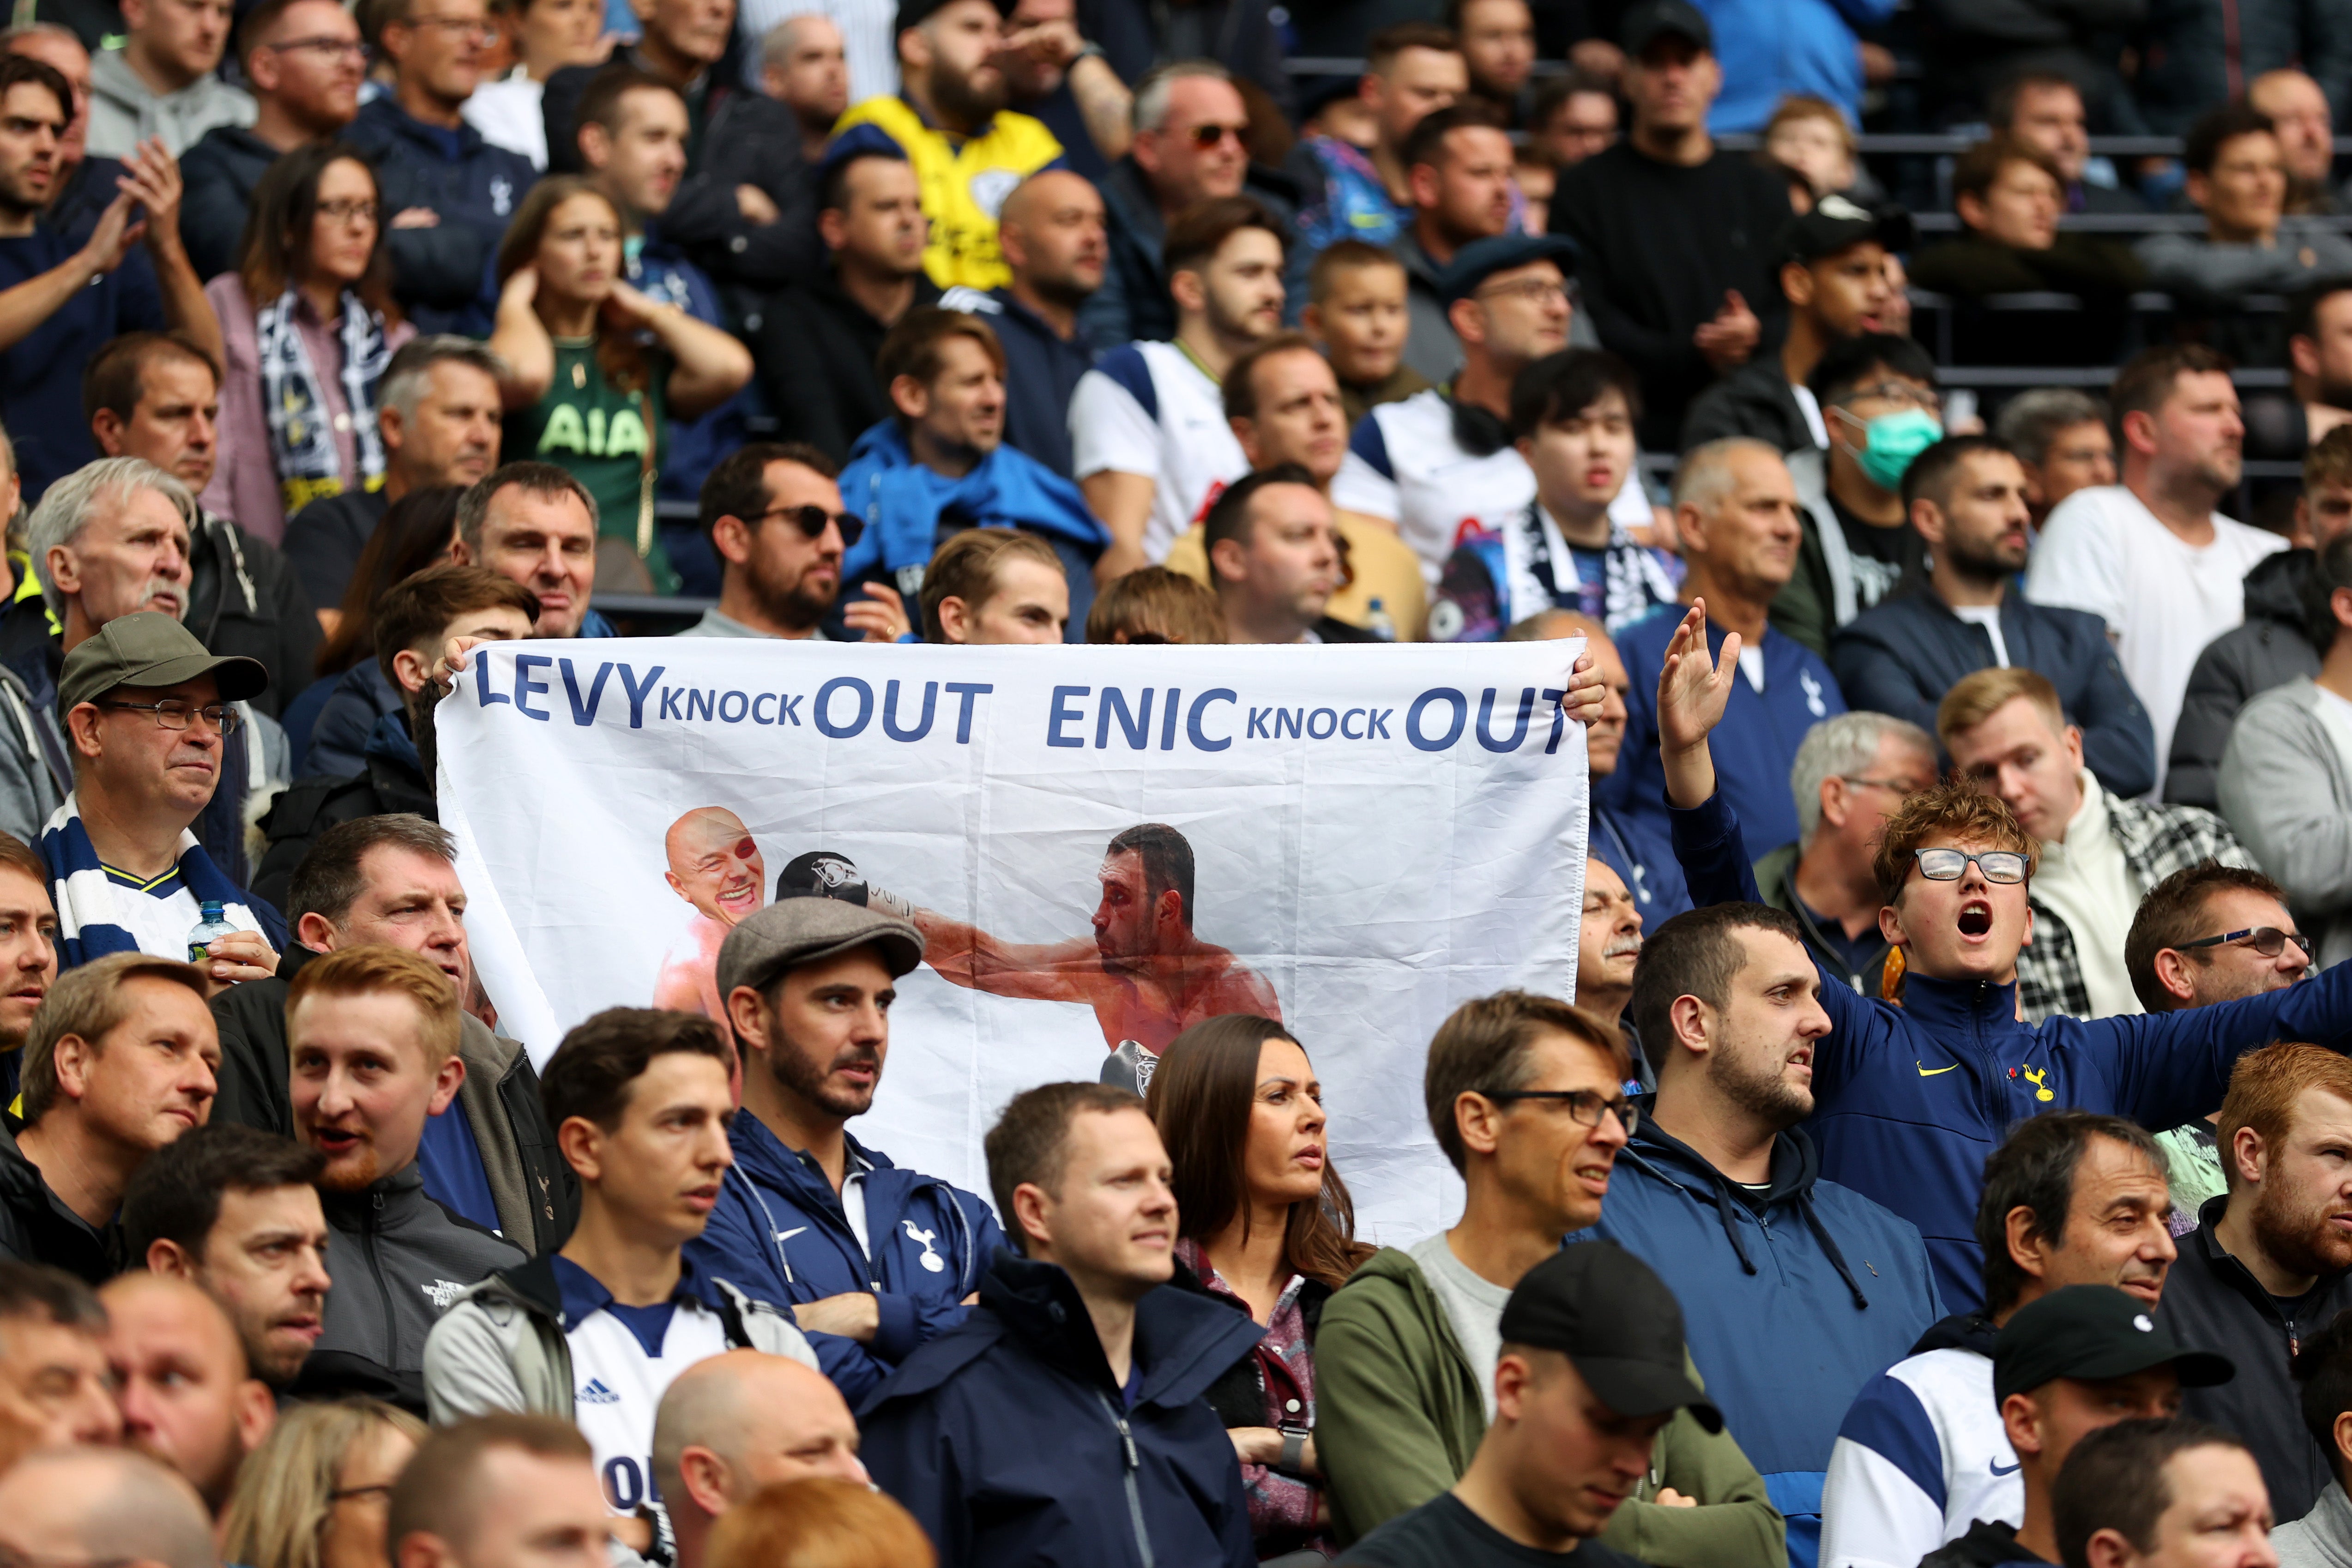 Tottenham fans hold a protest banner against chairman Daniel Levy and ENIC